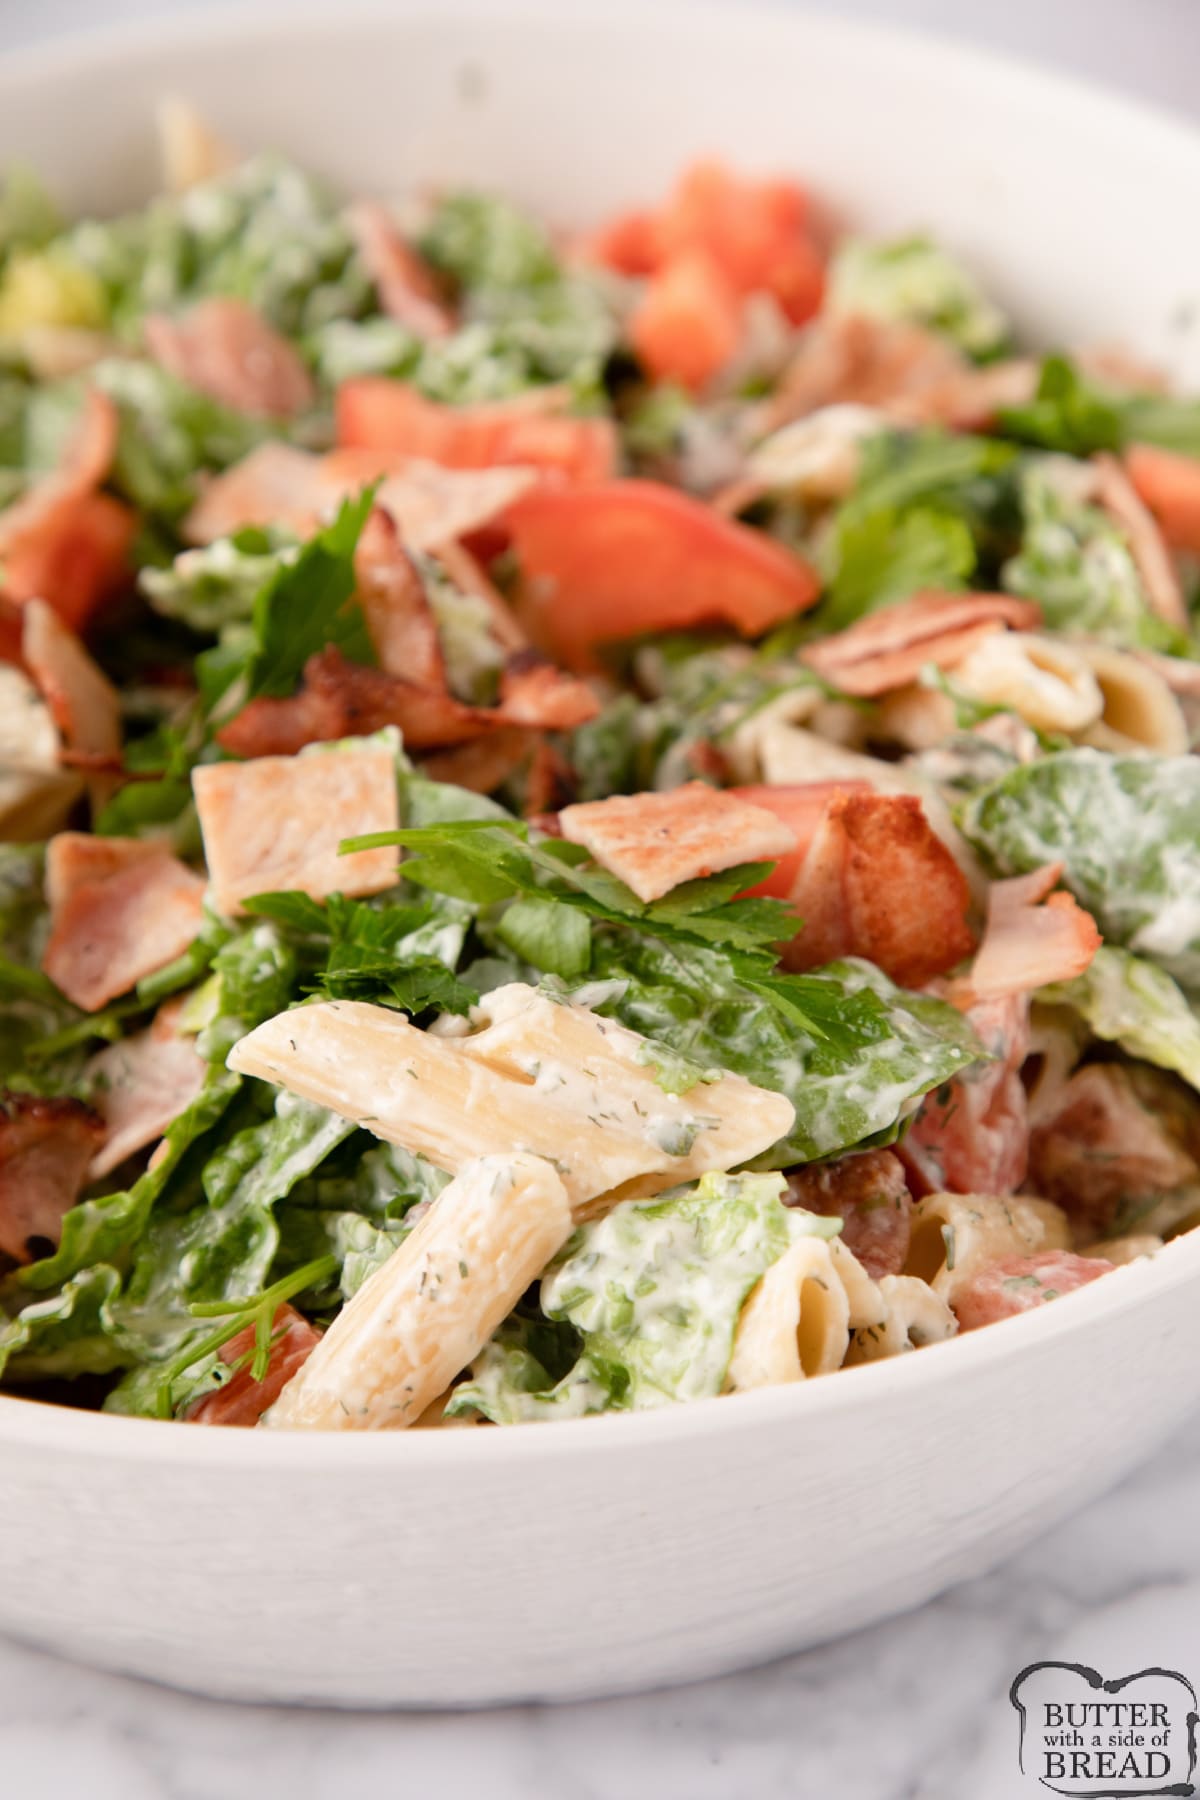 BLT Pasta Salad is full of bacon, lettuce and tomatoes that are coated with a creamy, homemade ranch dressing. Simple pasta salad recipe perfect for a meal or a side dish everyone will love! 